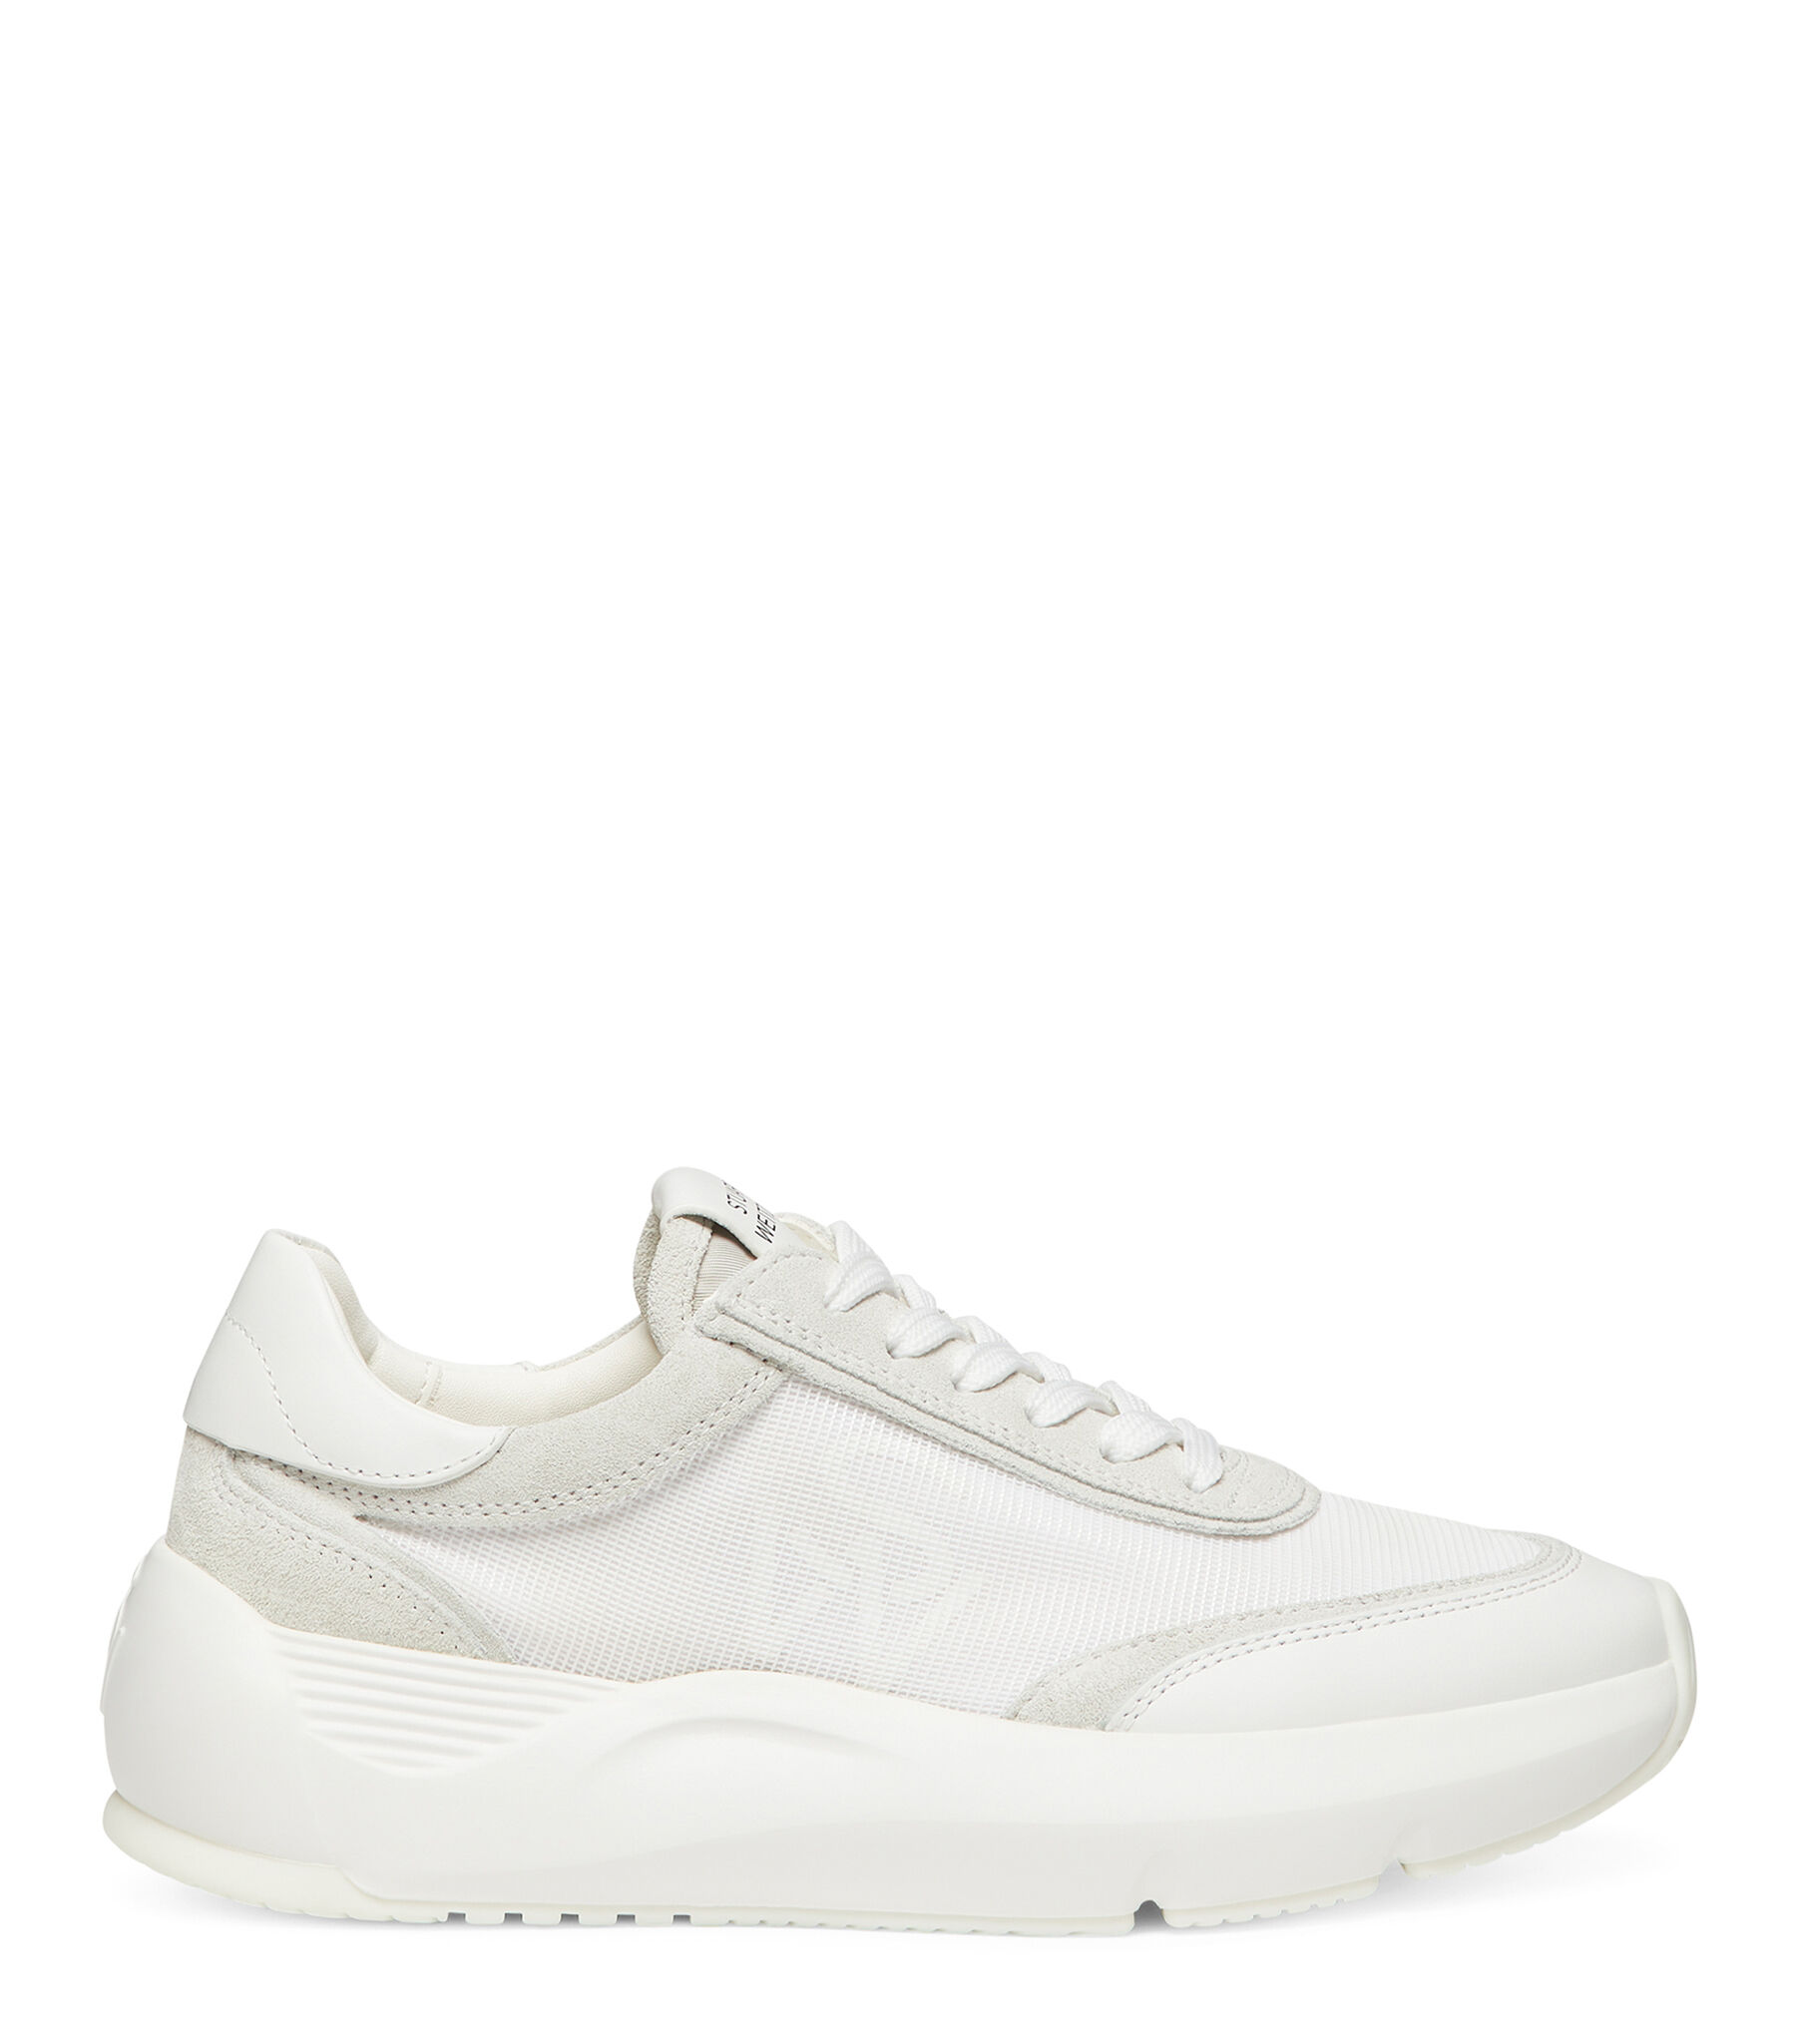 Stuart Weitzman Sw Glide Lace-up Sneaker - Donna Sneakers White 41